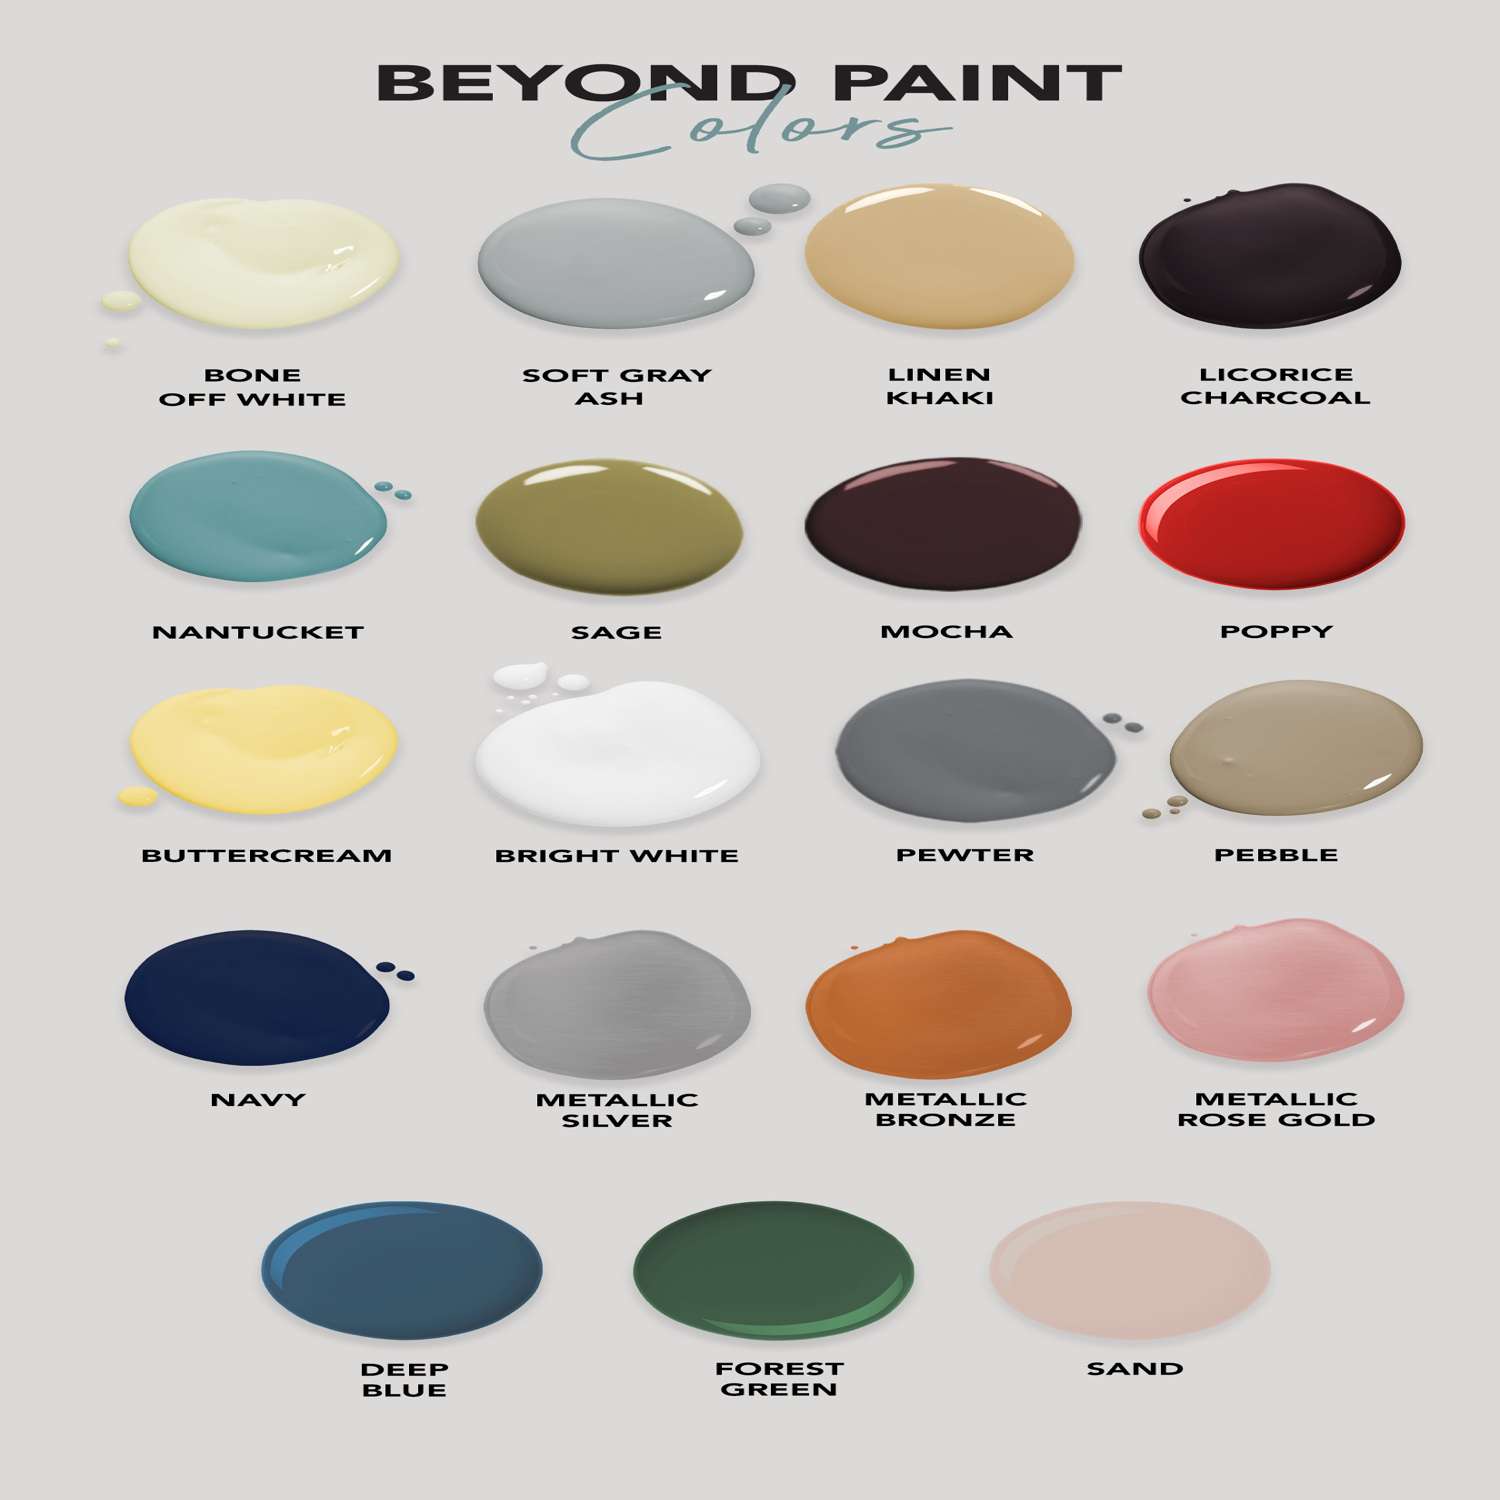 Beyond Paint All-in-One Furniture-Cabinets-and-Countertop Flat Deep Blue  Cabinet and Furniture Paint (1-pint) in the Cabinet & Furniture Paint  department at